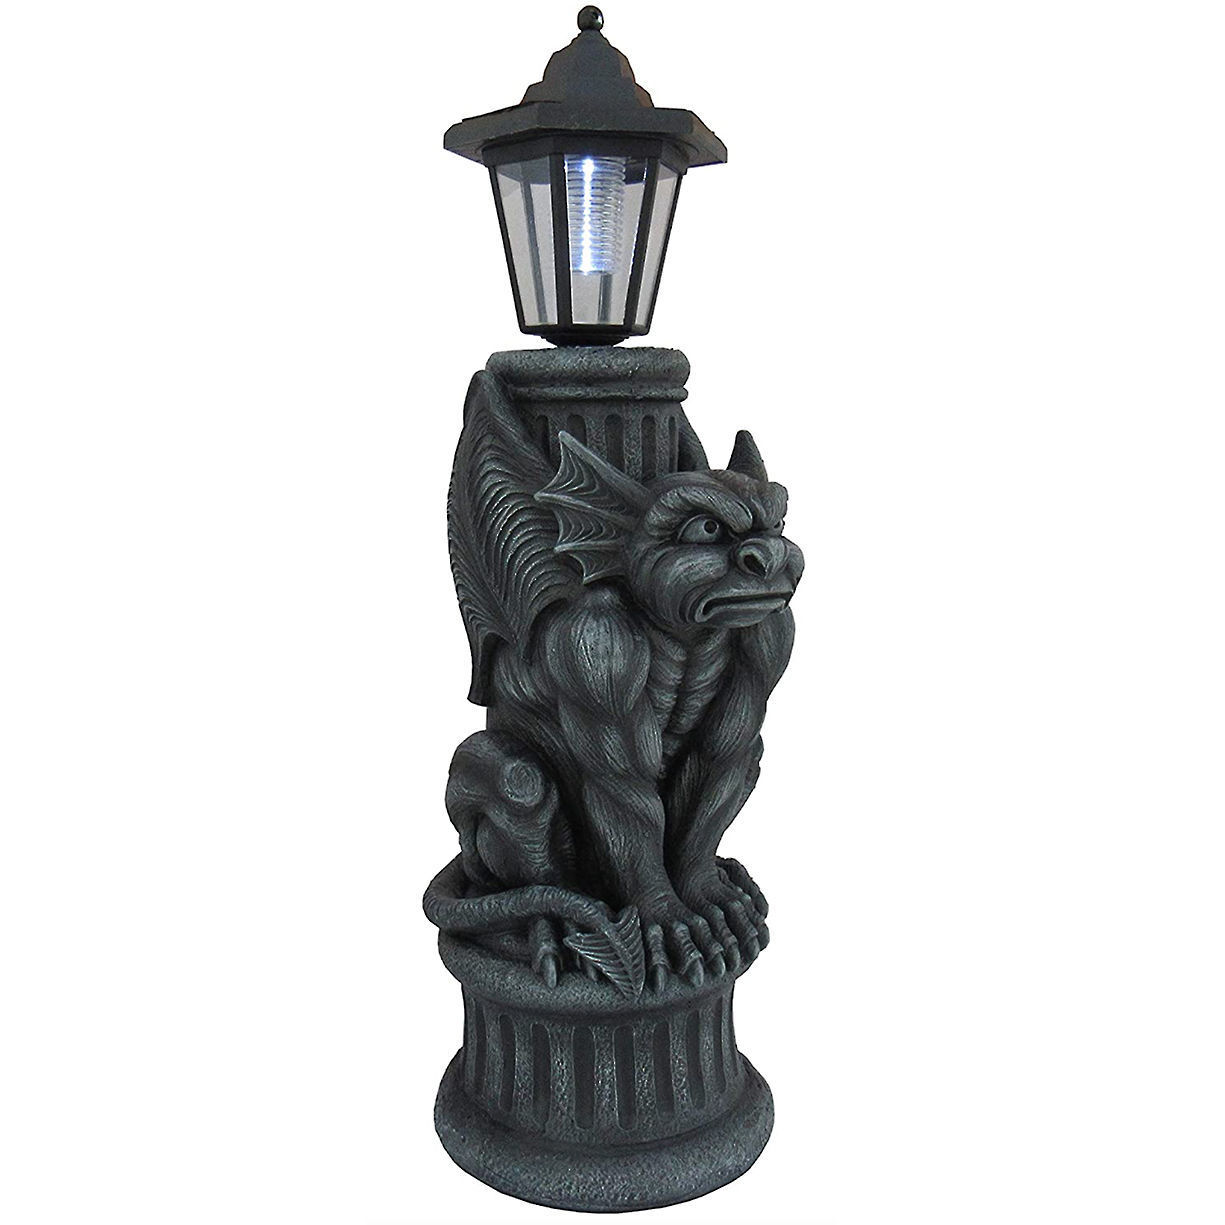 Gothic flair for gardens or walkways, the Glowing Grimace gargoyle statue has a solar-powered light, made in polyresin